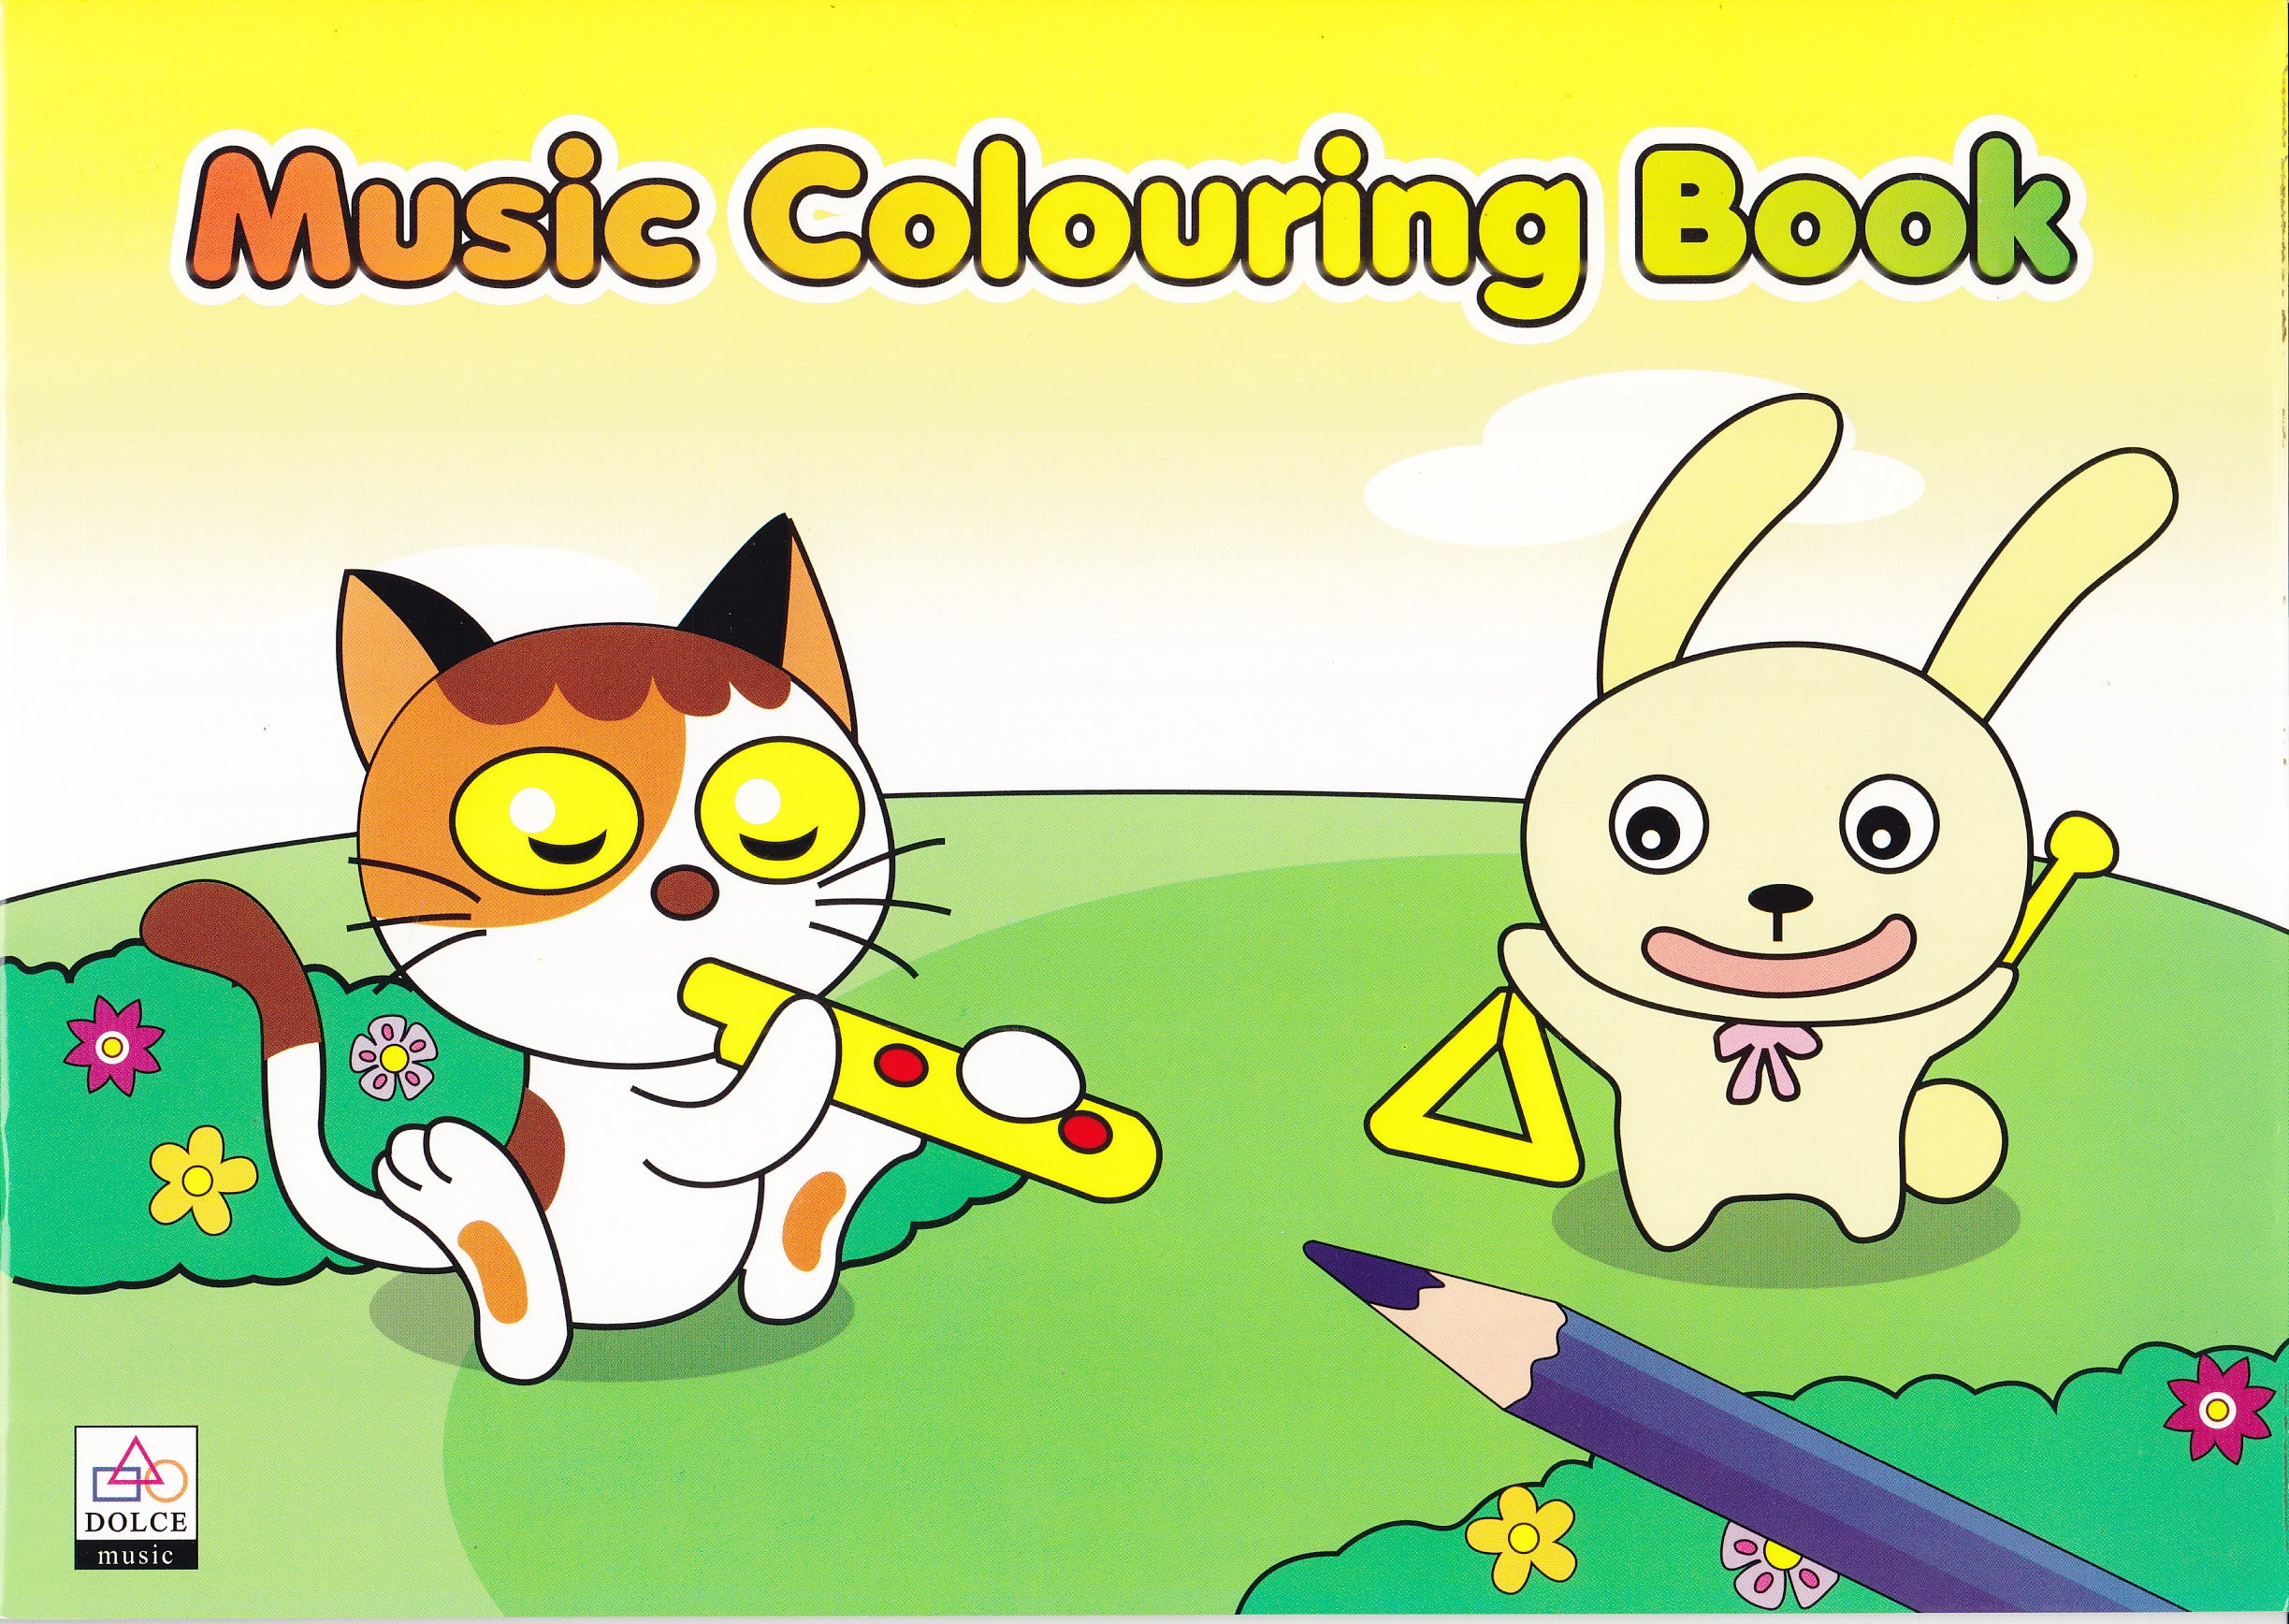 Music-Colouring-Book-1